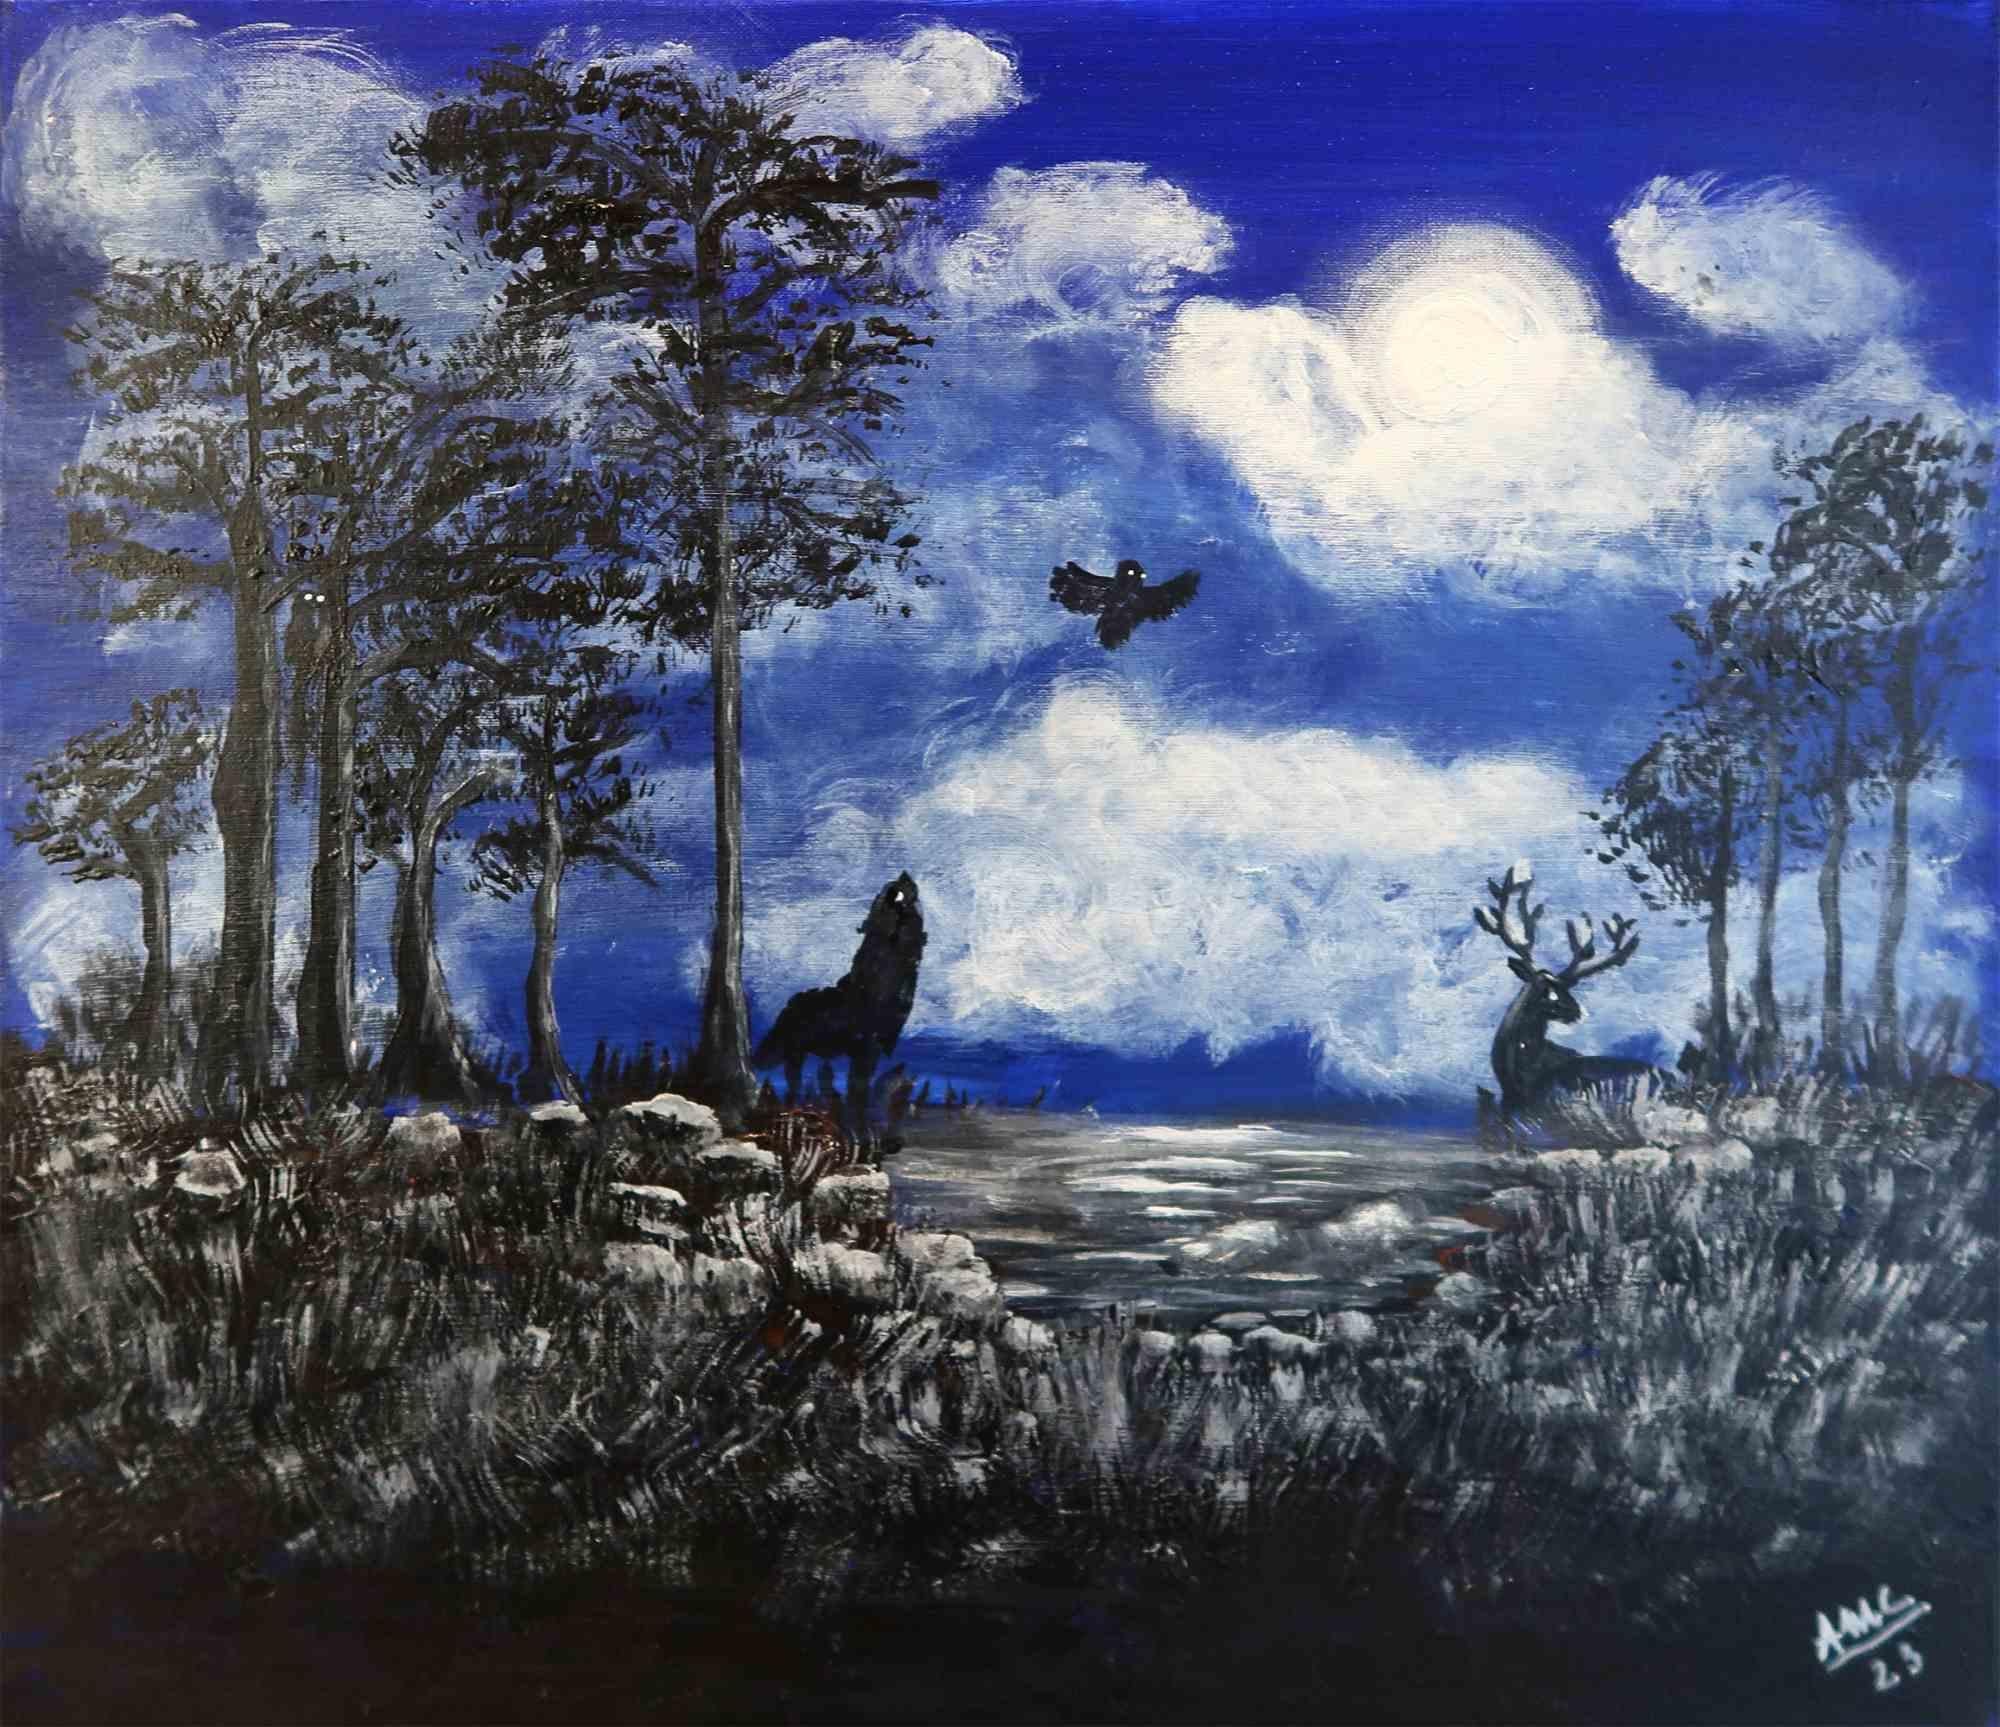 Things' Soul is an enchanting painting by the Italian artist Anna Maria Caboni.

This painting, combining a figurative landscape with abstract elements, takes place in the middle of a dark forest, where, by means of only a few wise brushstrokes, we